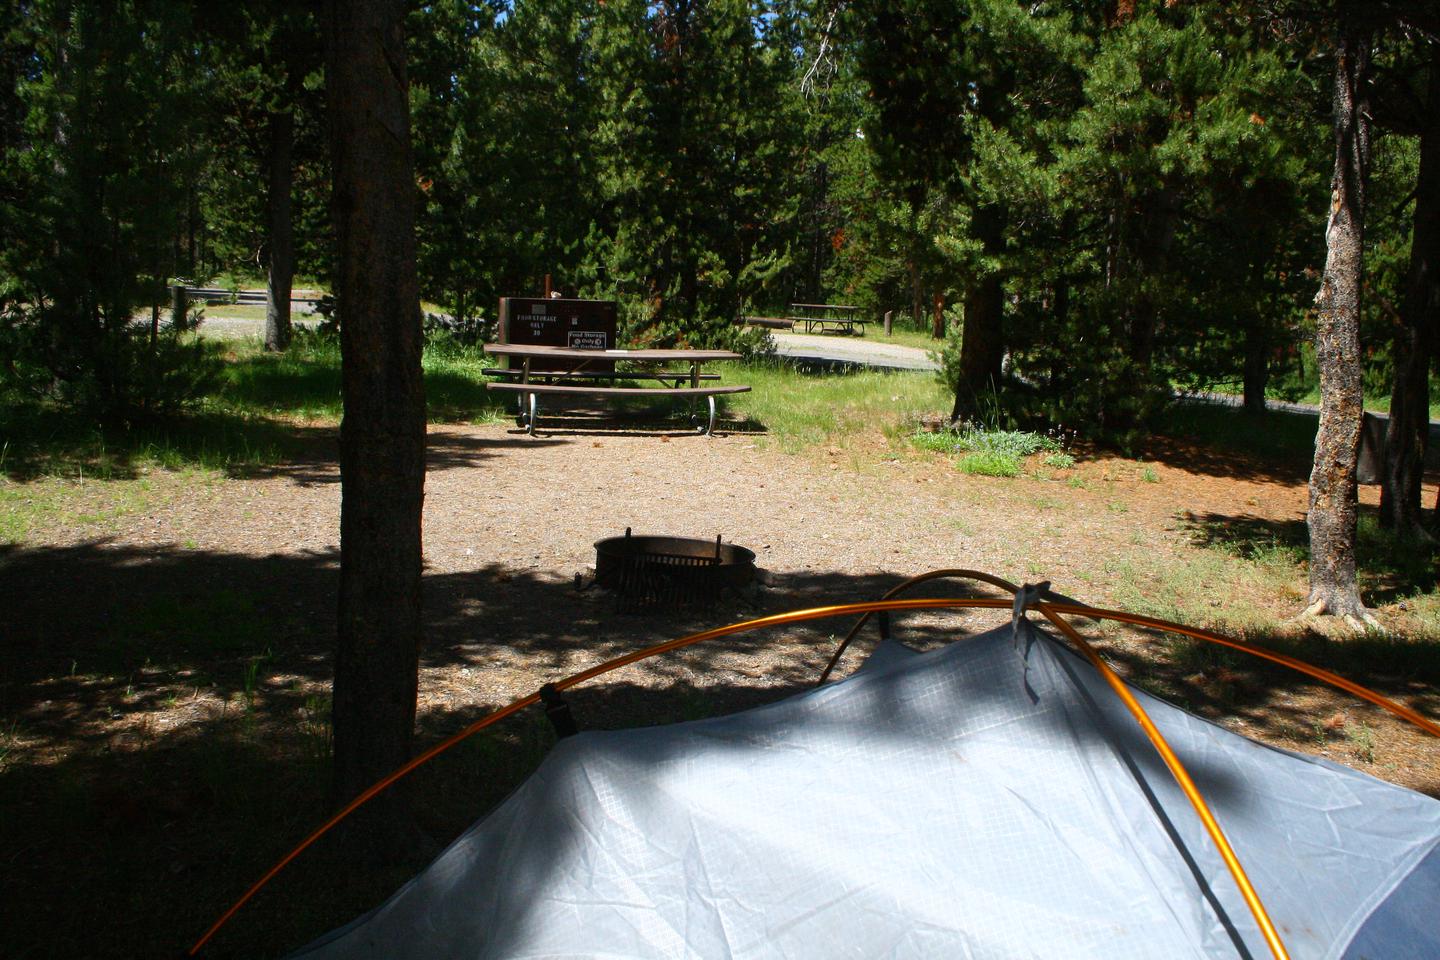 Indian Creek Campground site #30.Indian Creek Campground site #30